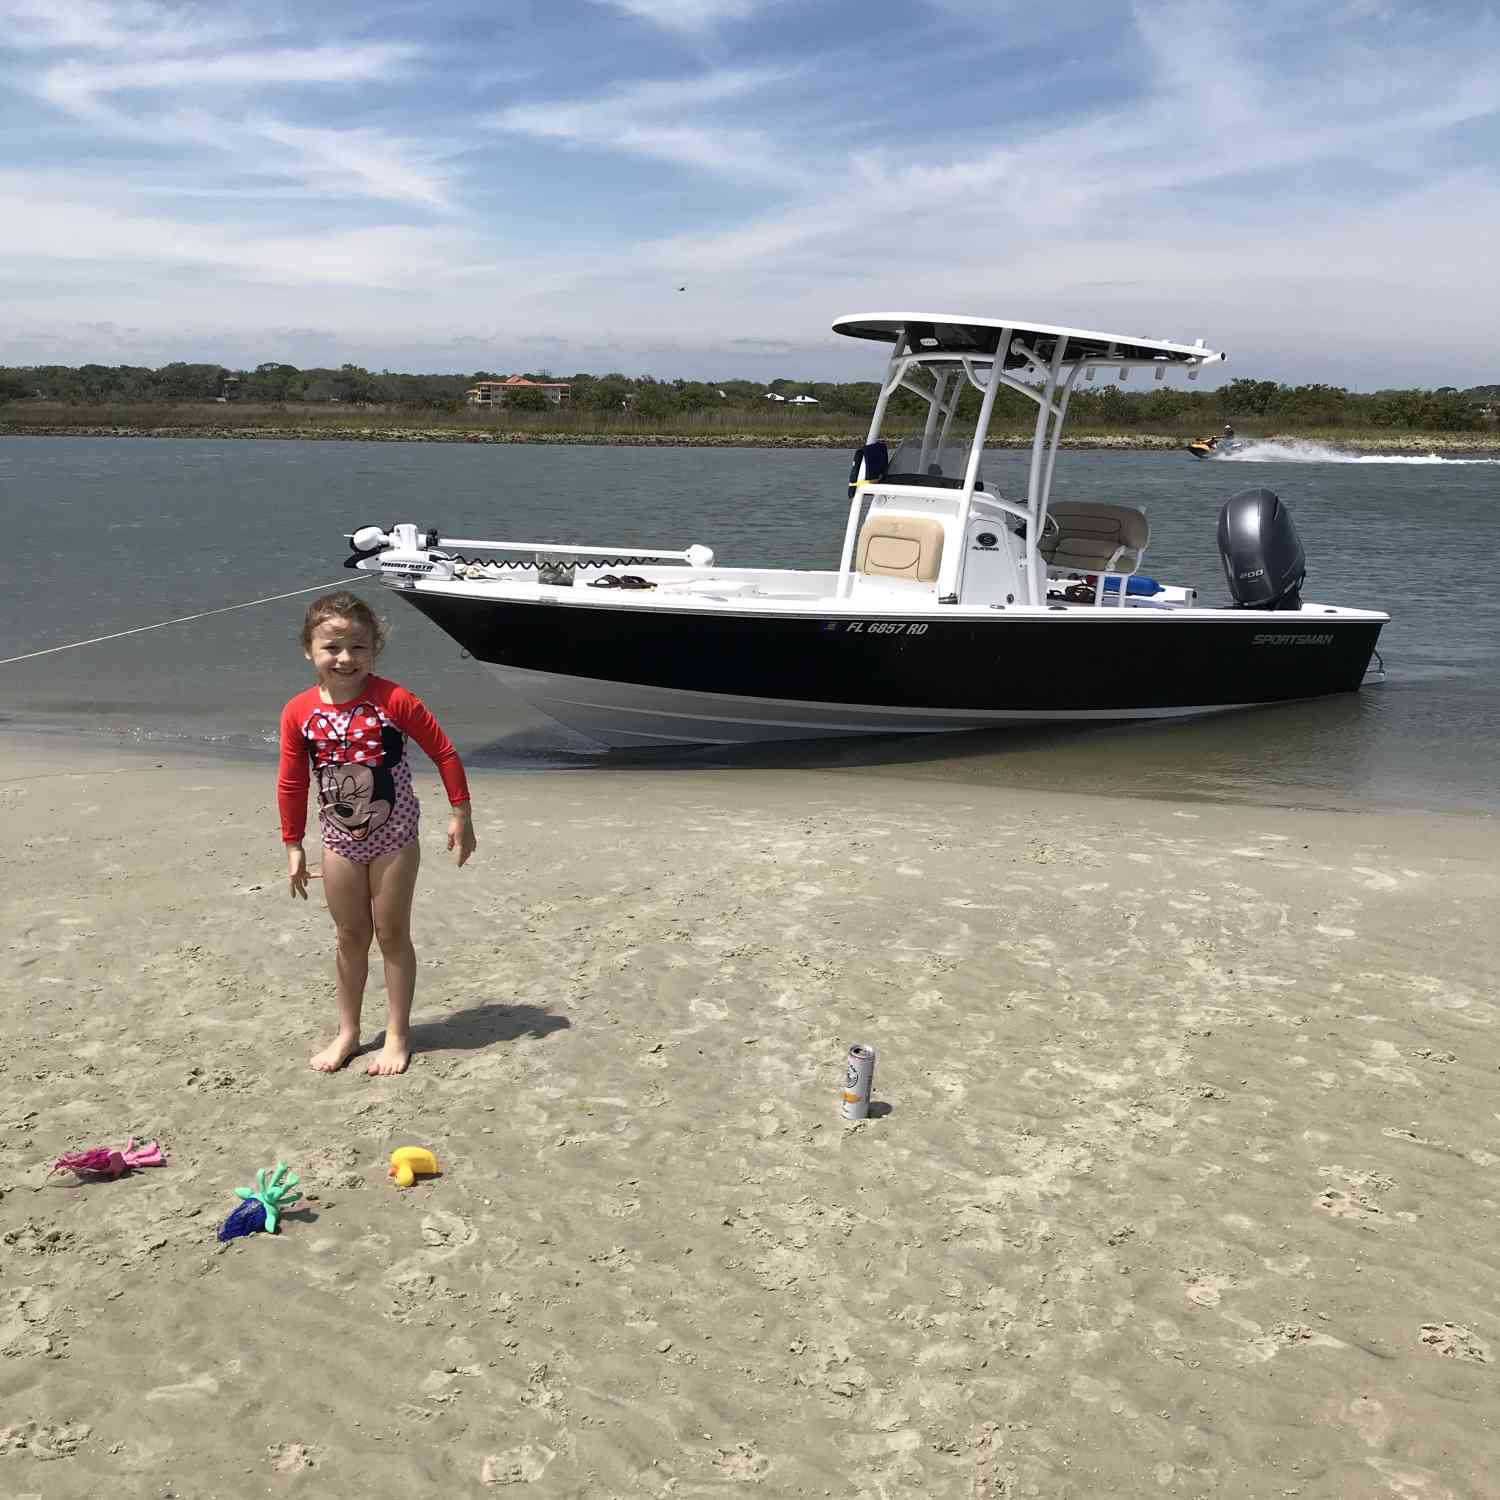 Title: Bird Island - On board their Sportsman Masters 227 Bay Boat - Location: Saint Augustine, Fl. Participating in the Photo Contest #SportsmanMay2021